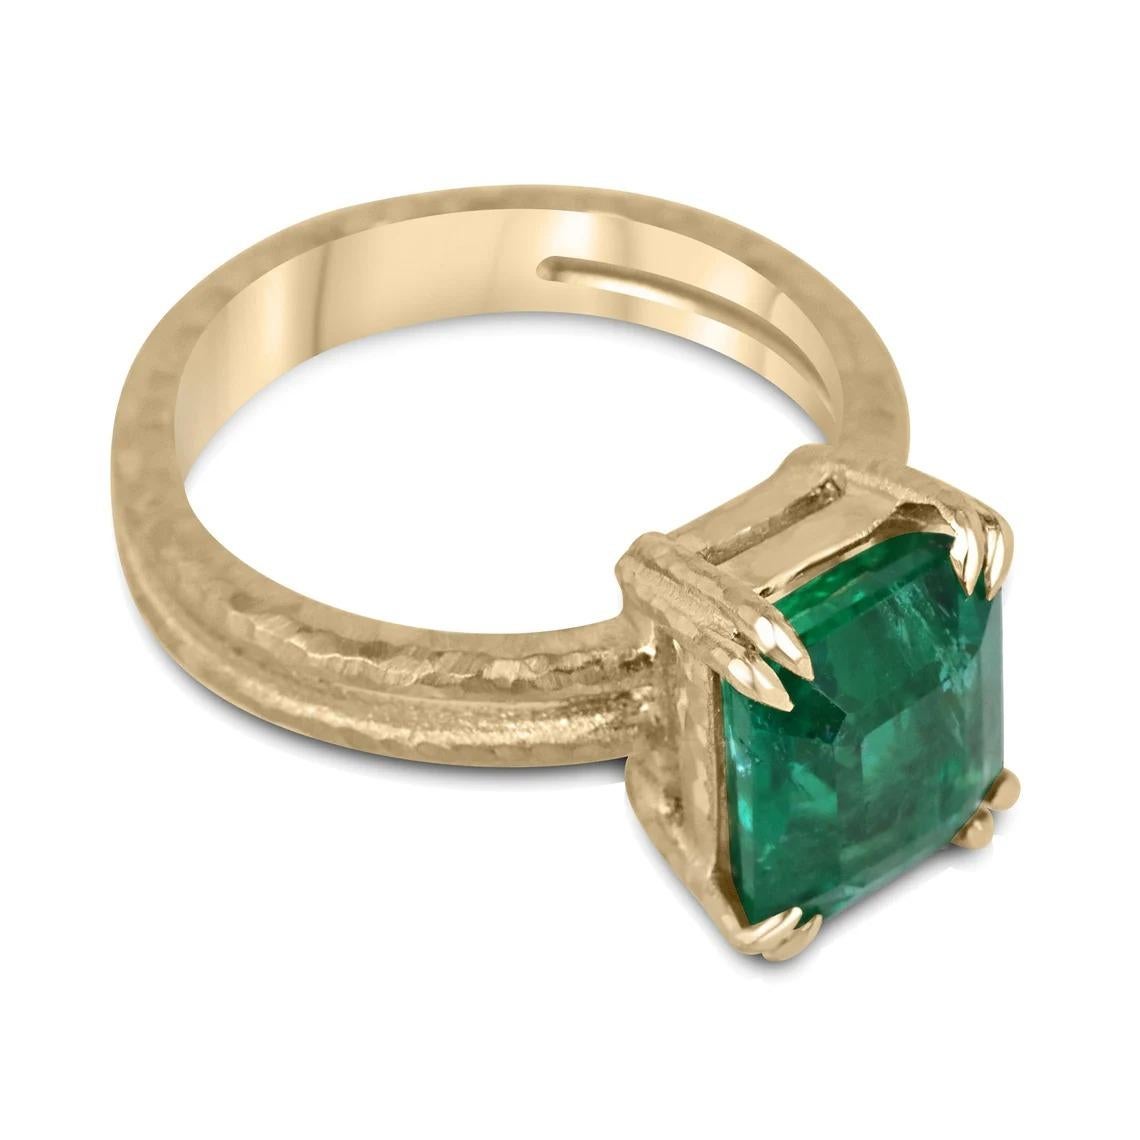 This exquisite solitaire ring features a natural 3.43-carat emerald cut emerald that boasts a stunning, vivid dark green color with excellent-very good luster that captivates the beholder. The emerald is set in a double claw prong basket, which is